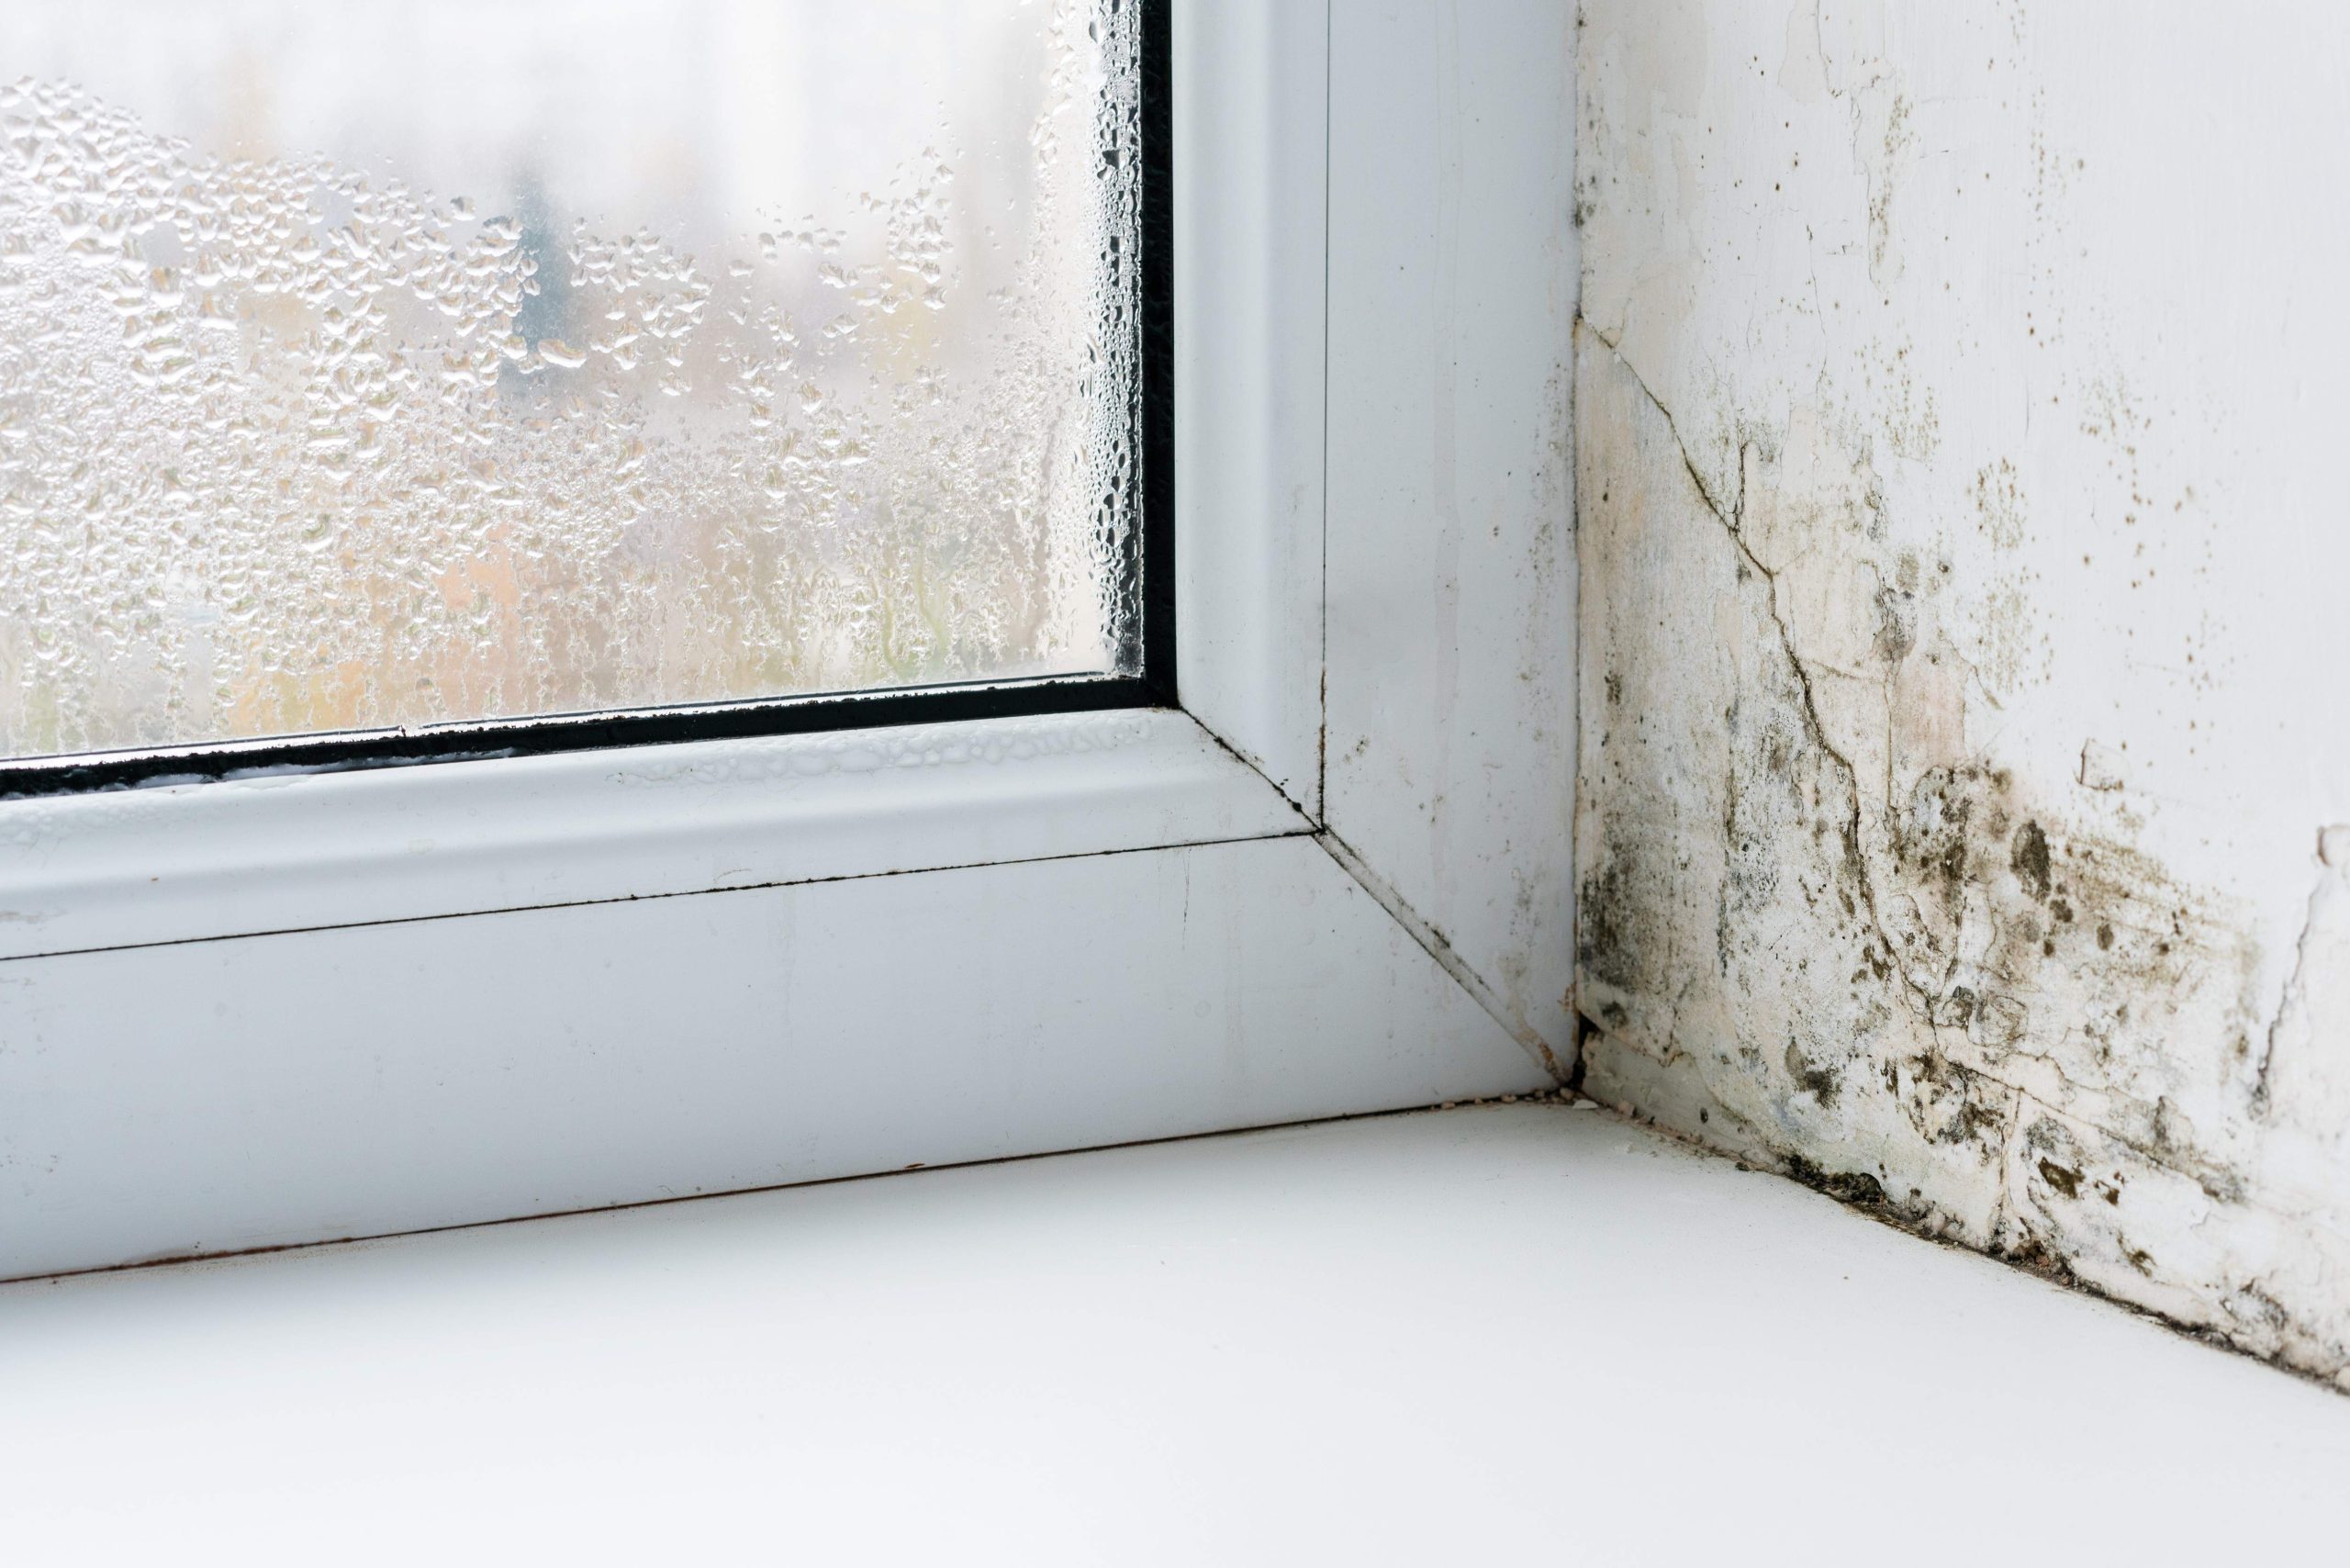 Over 1,100 Private Rented Homes Have Dangerous Damp and Mould